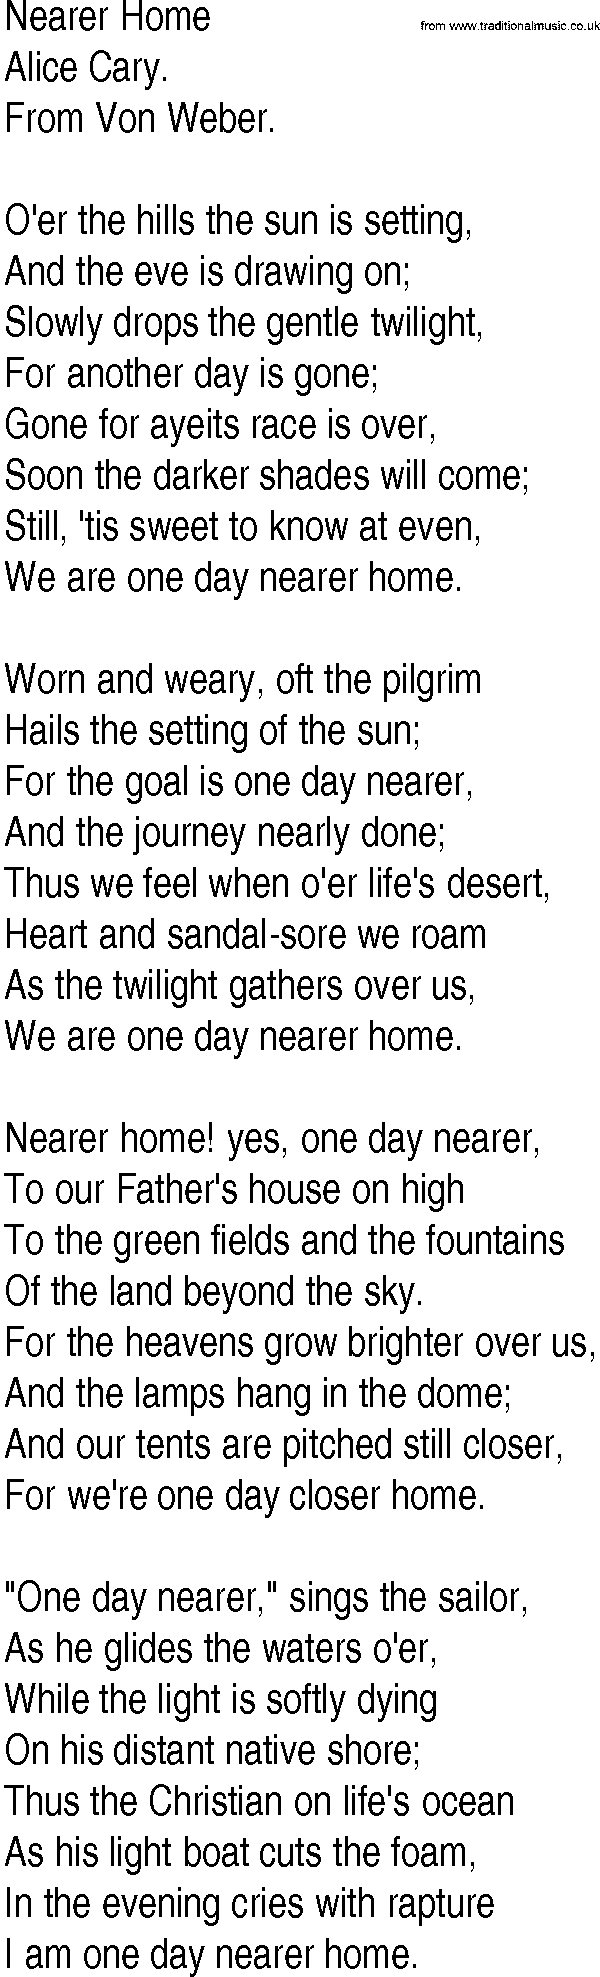 Hymn and Gospel Song: Nearer Home by Alice Cary lyrics